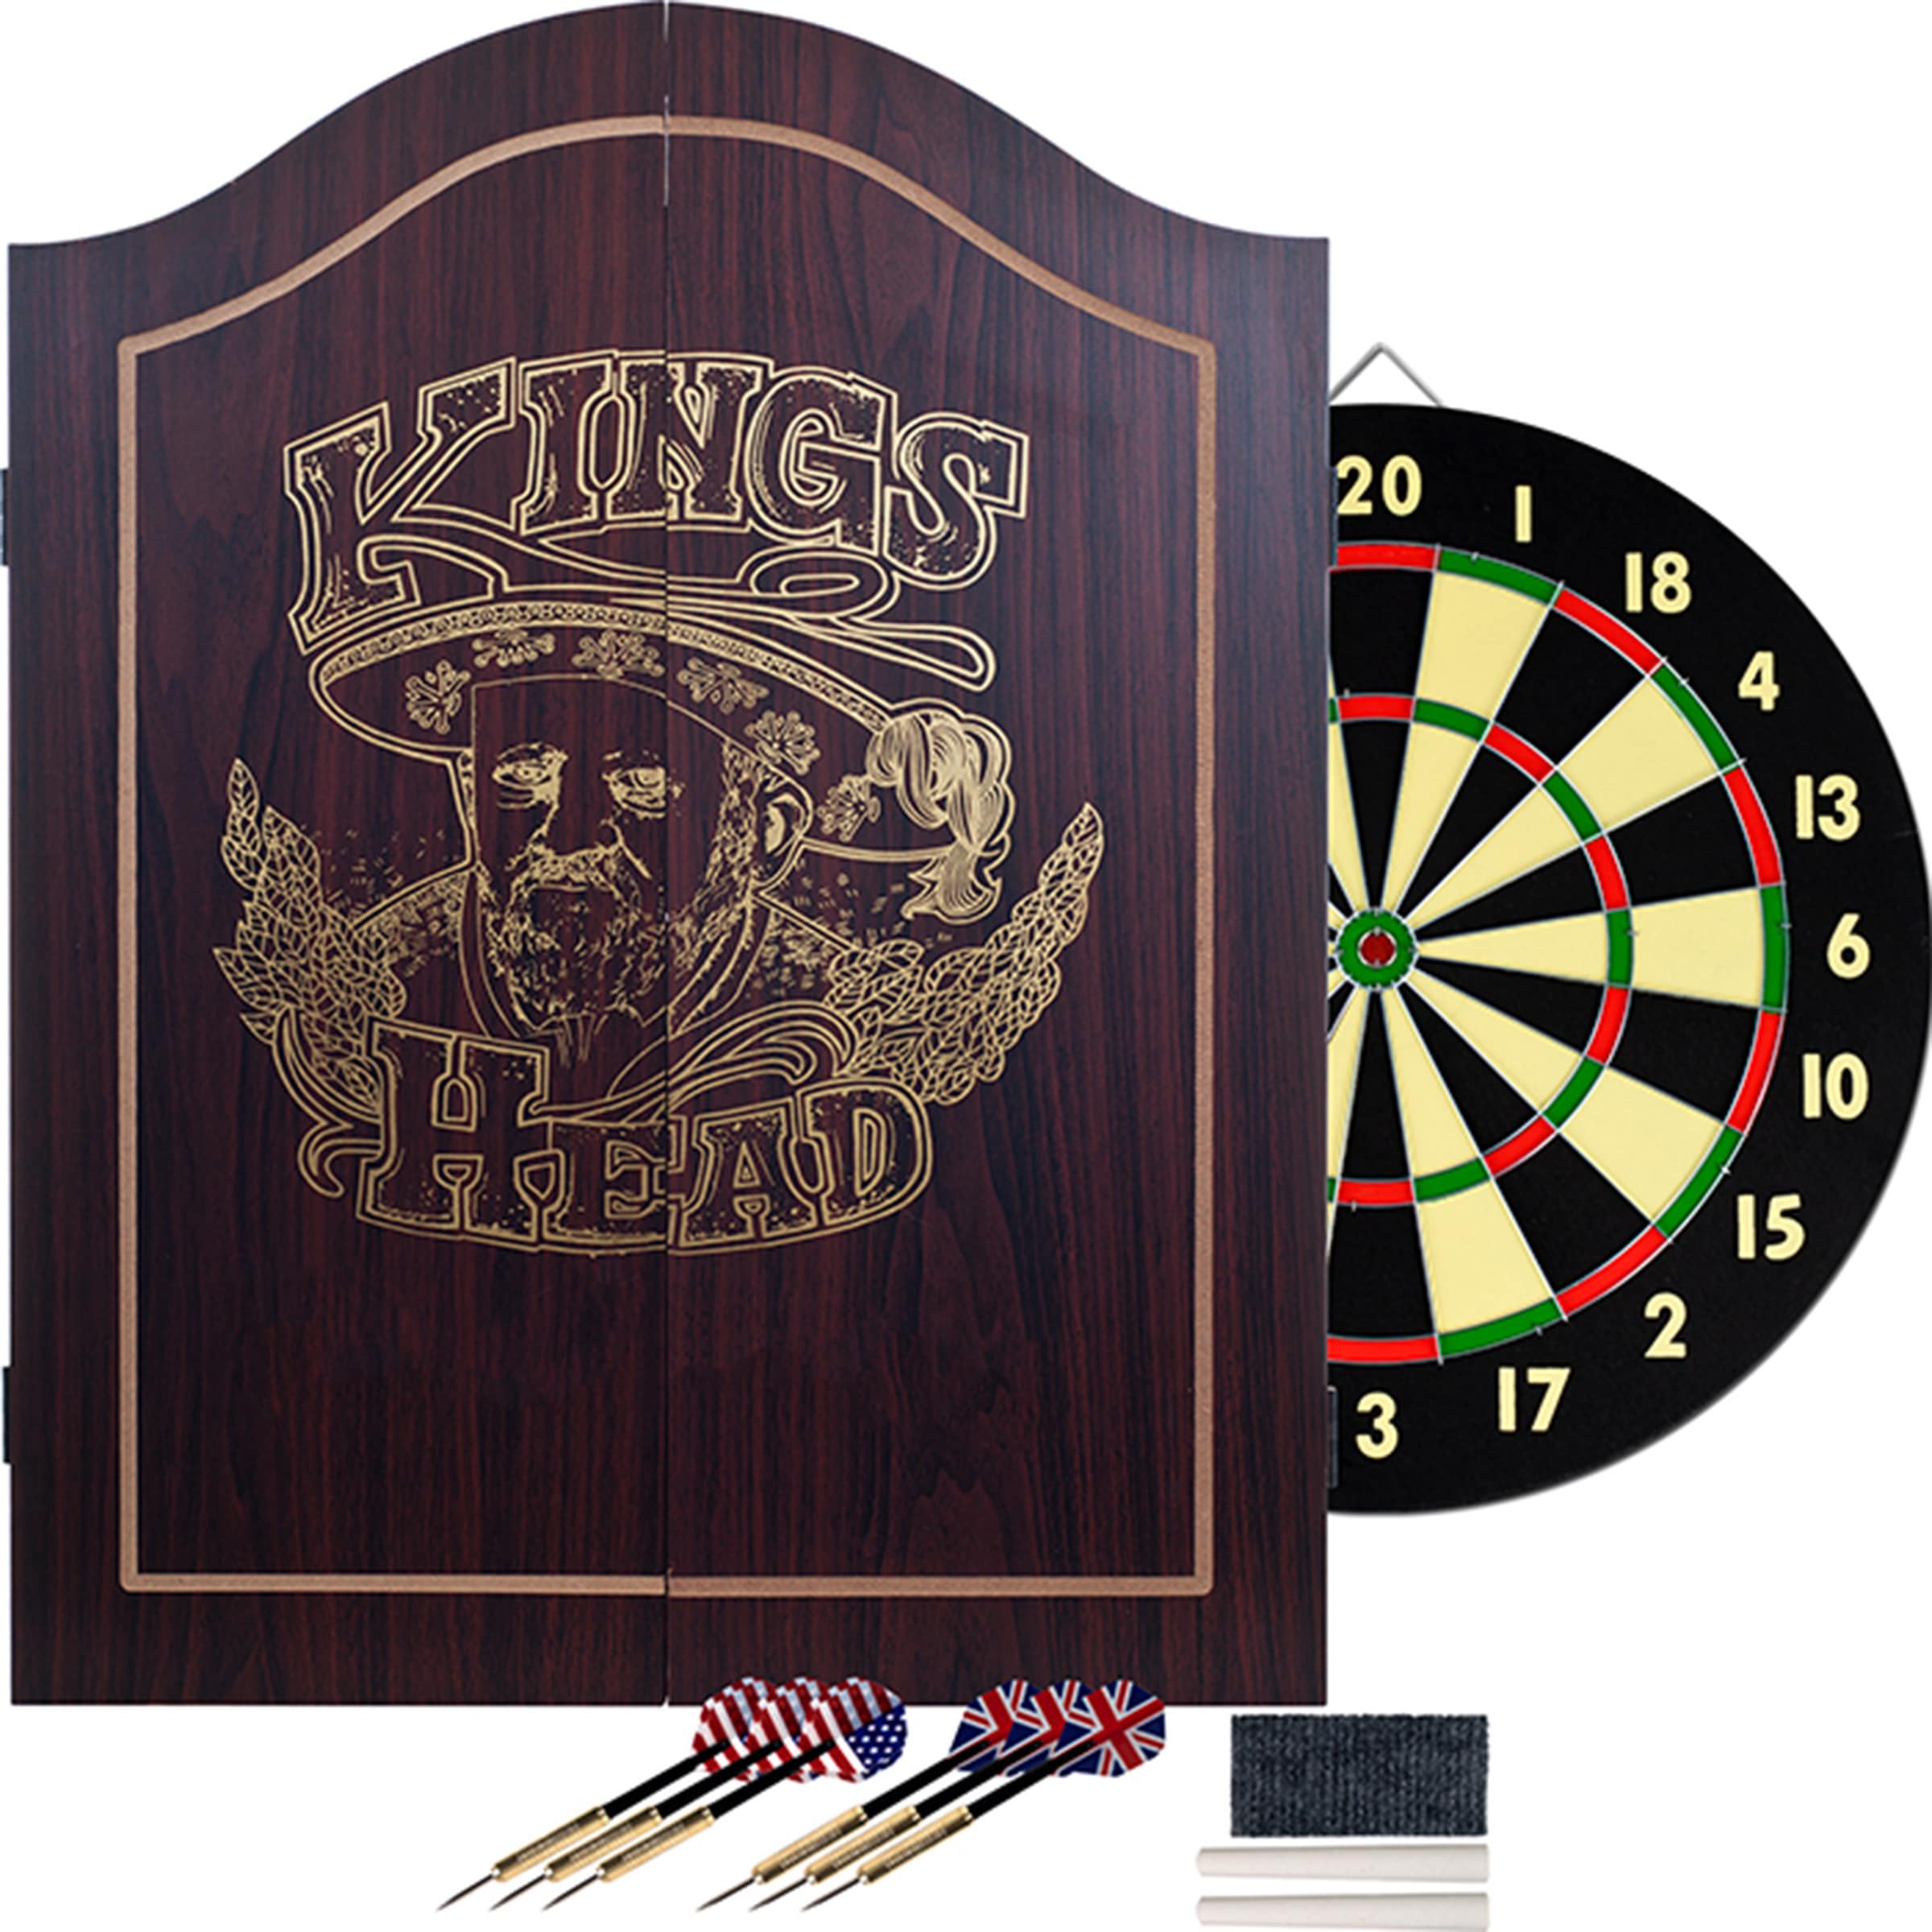 3 Key Essentials for Easy Building of Outdoor Dartboard Stand - DIY  projects for everyone!